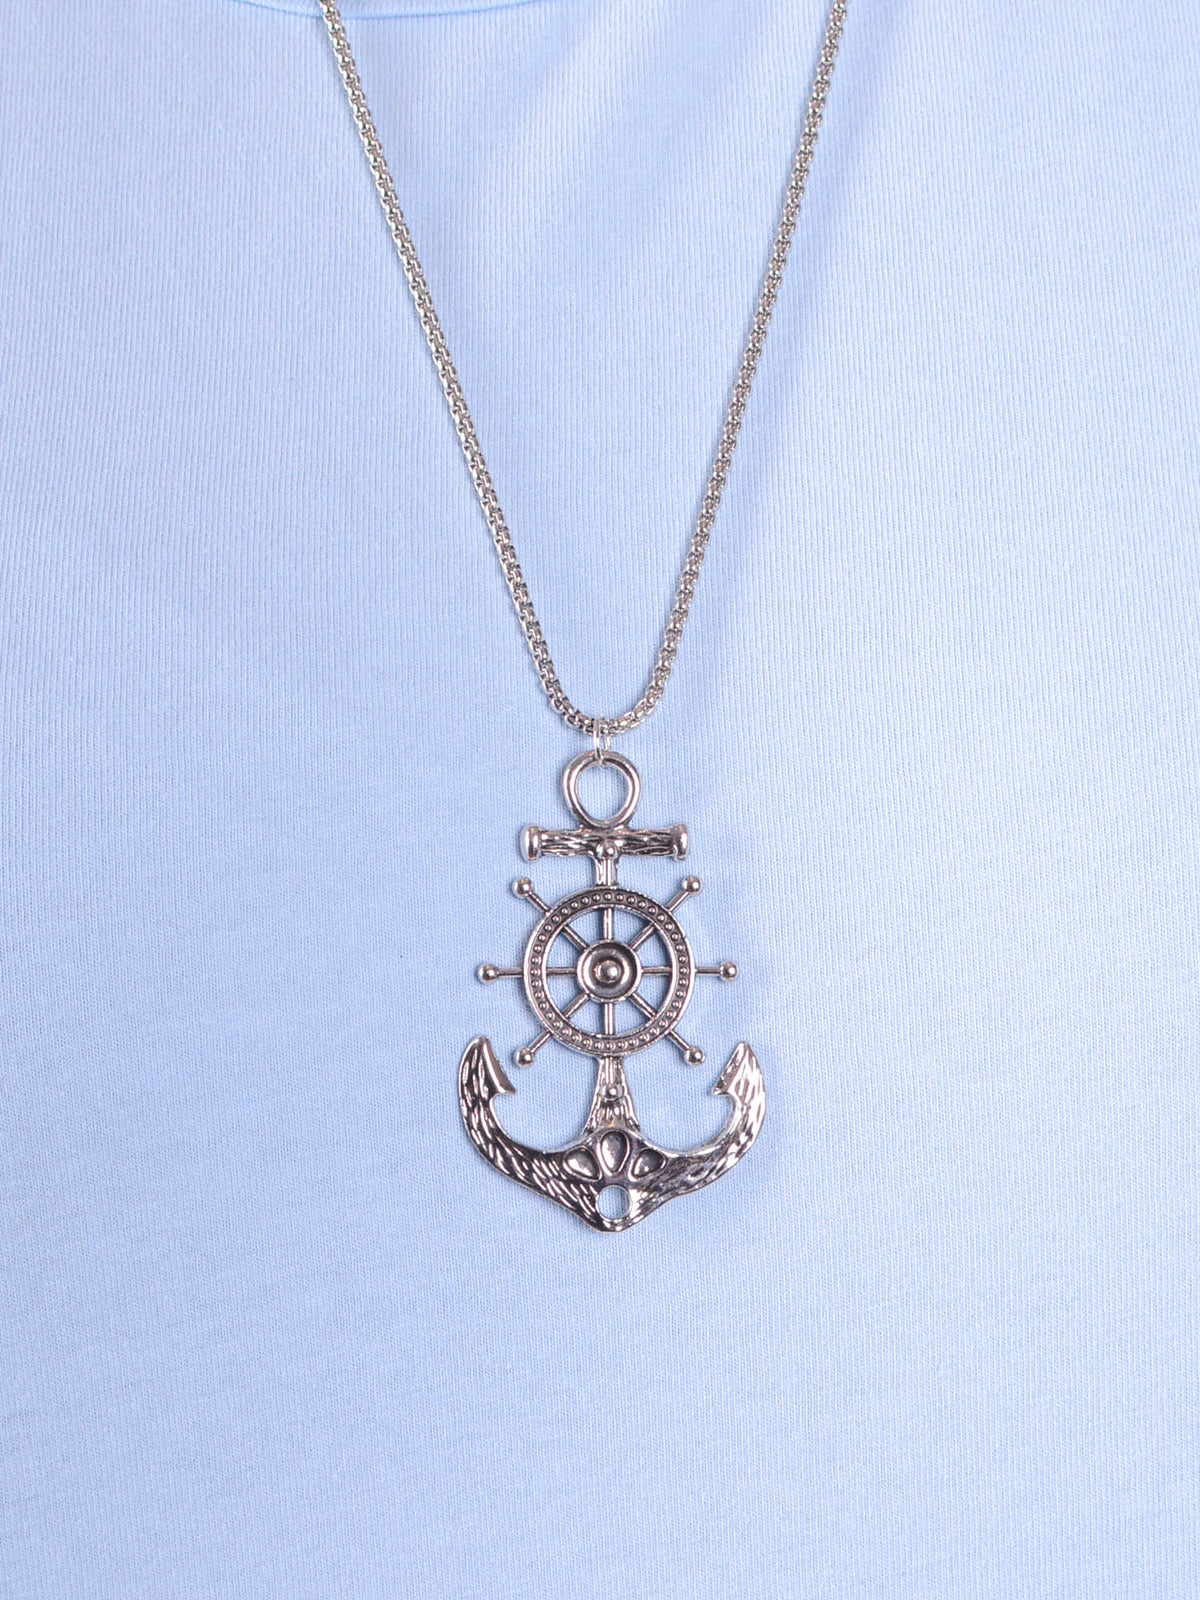 Silver Nautical Anchor and Wheel Necklace - NAU5, , Pure Plus Clothing, Lagenlook Clothing, Plus Size Fashion, Over 50 Fashion